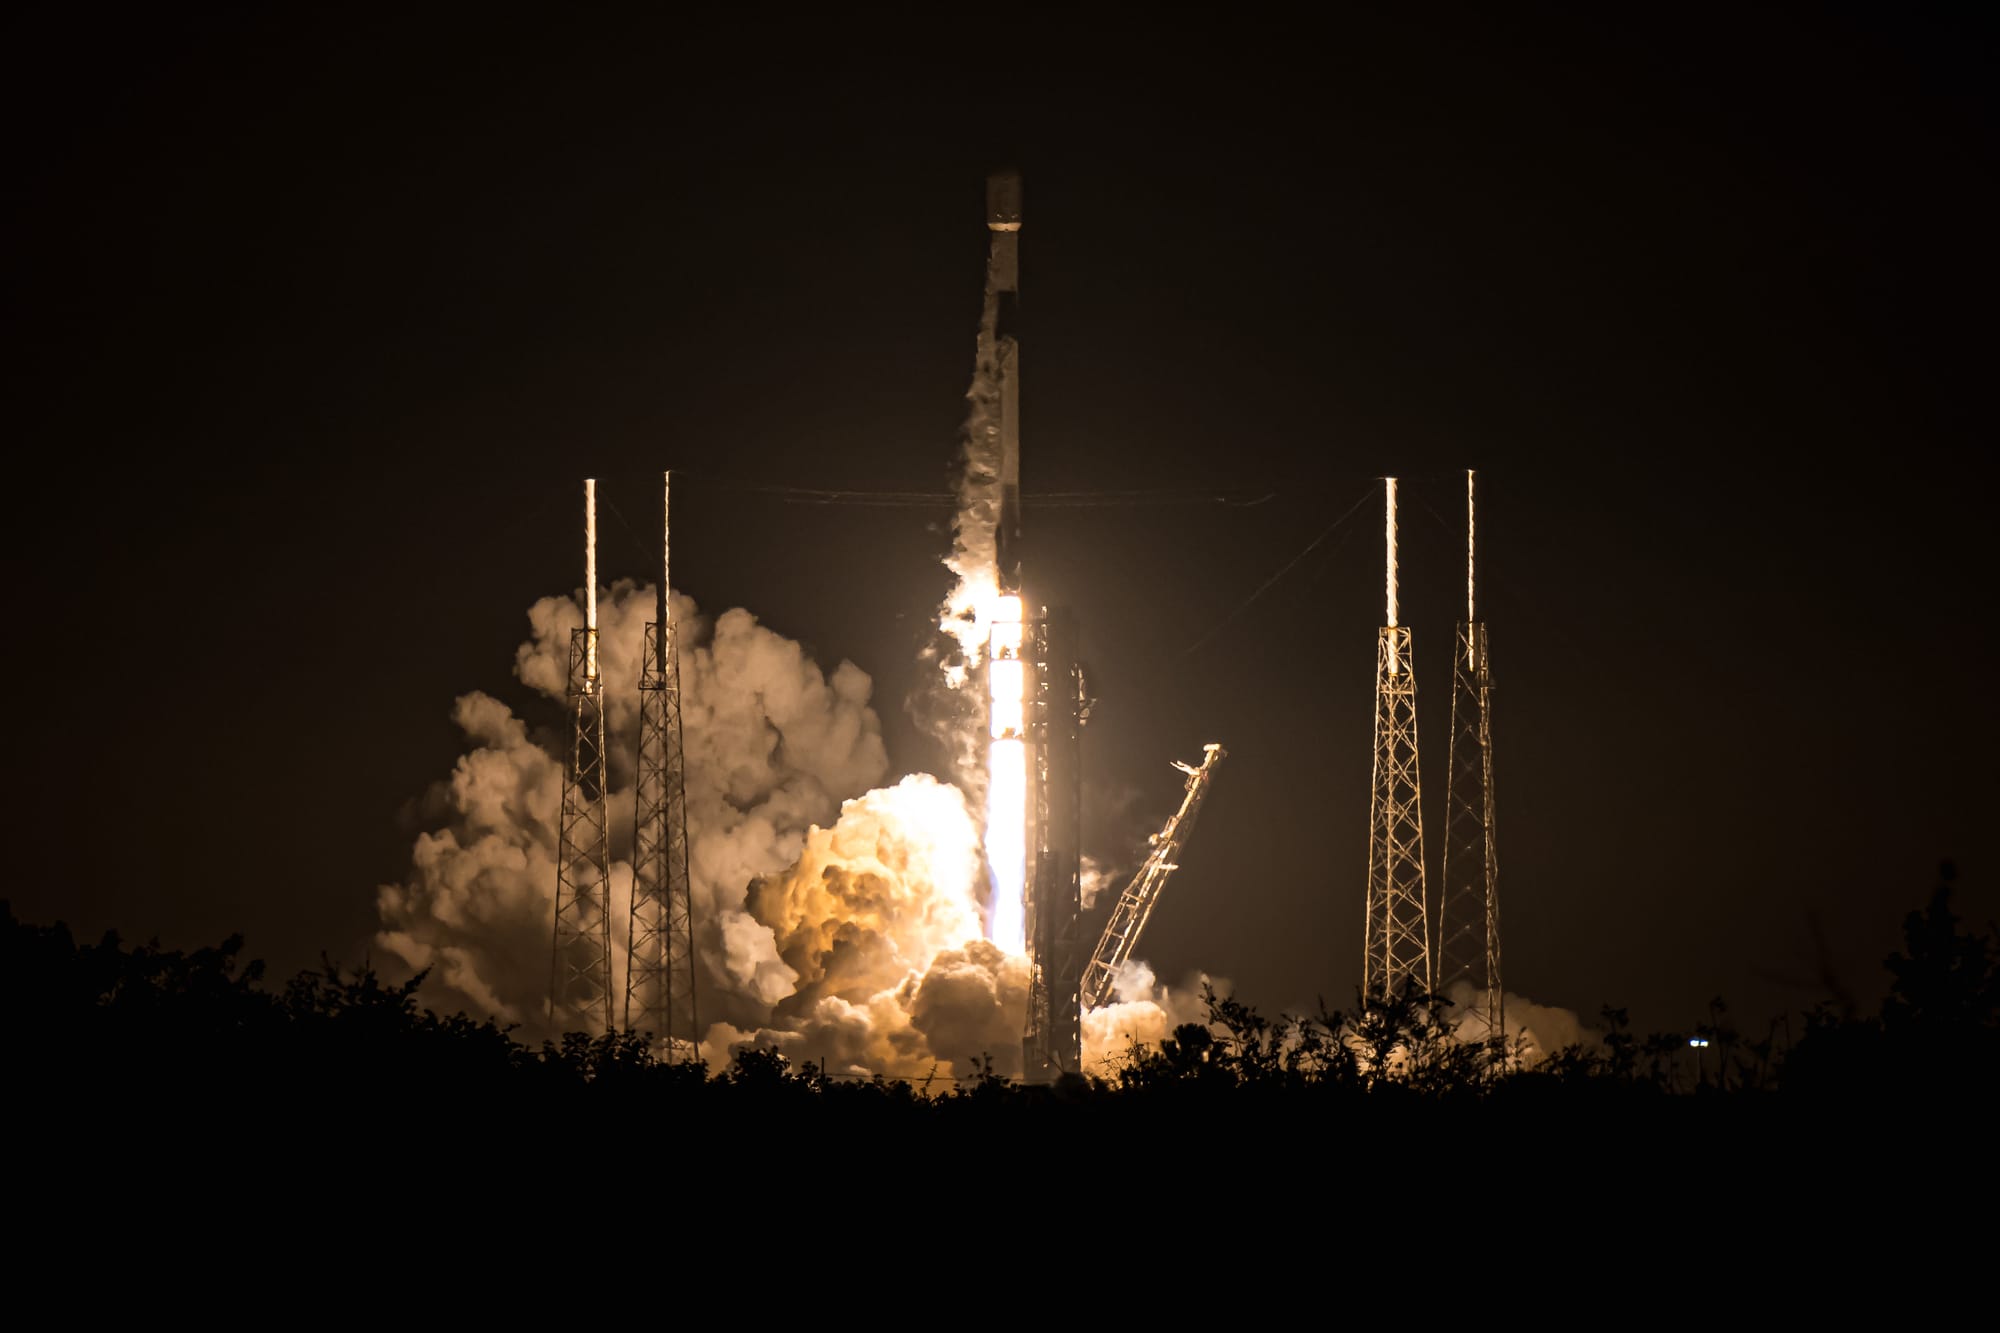 Falcon 9 lifting off from SLC-40. ©SpaceX